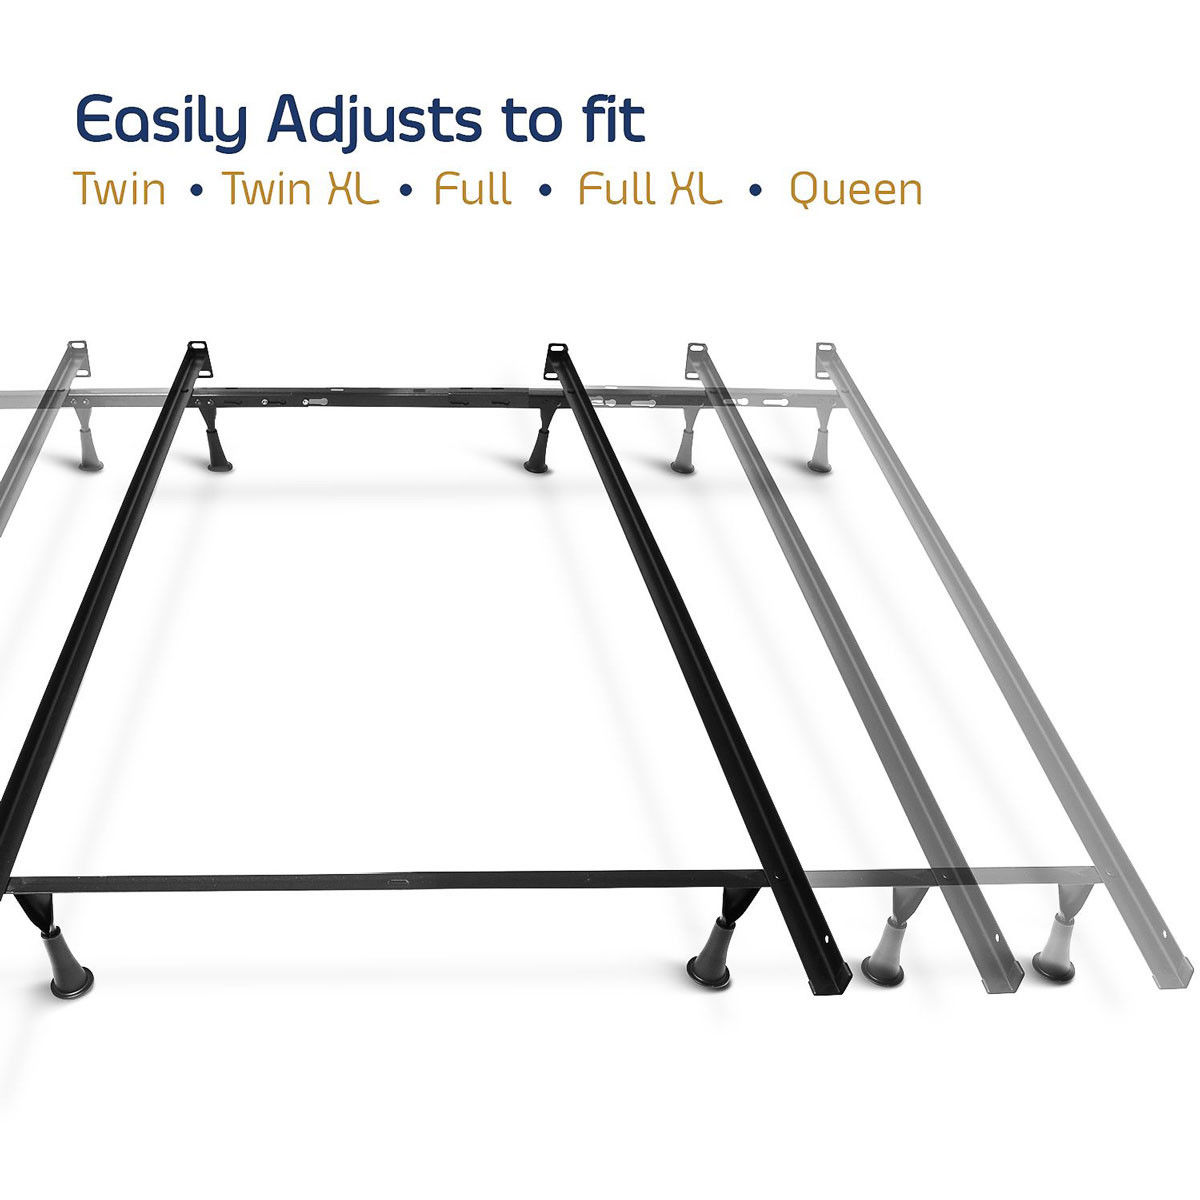 Metal Bed Frame with Center Piece Questions & Answers